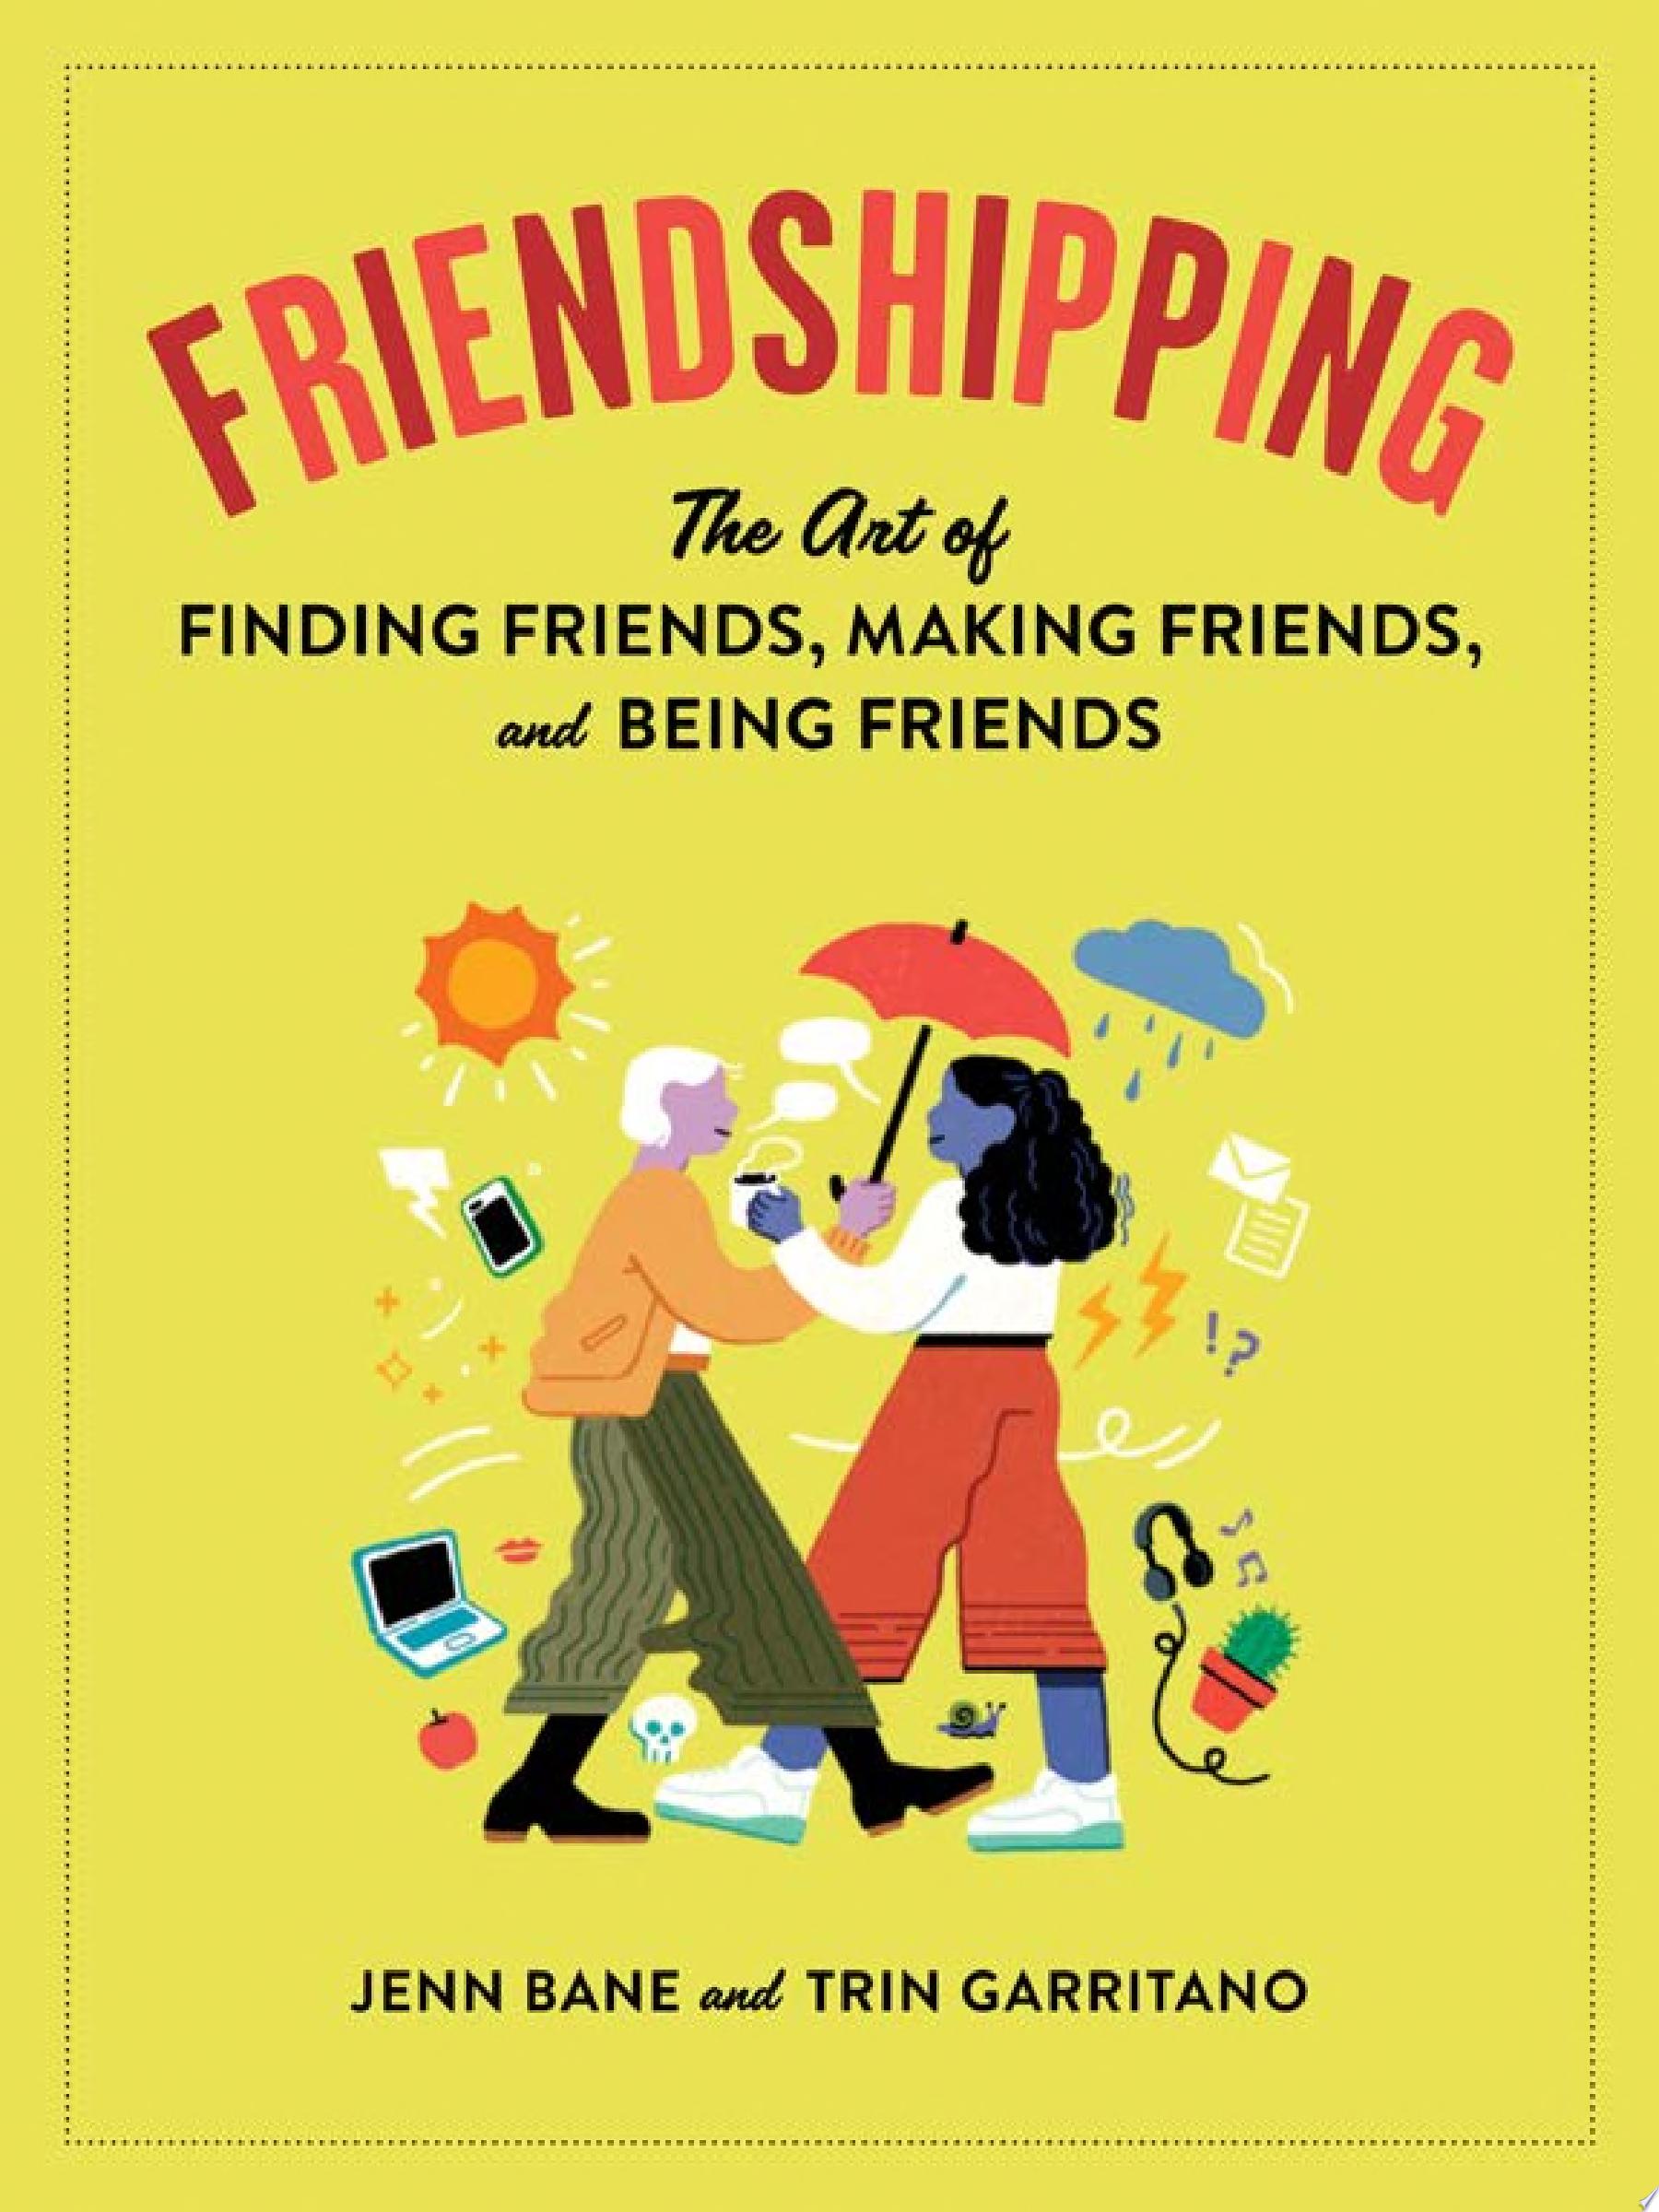 Image for "Friendshipping"